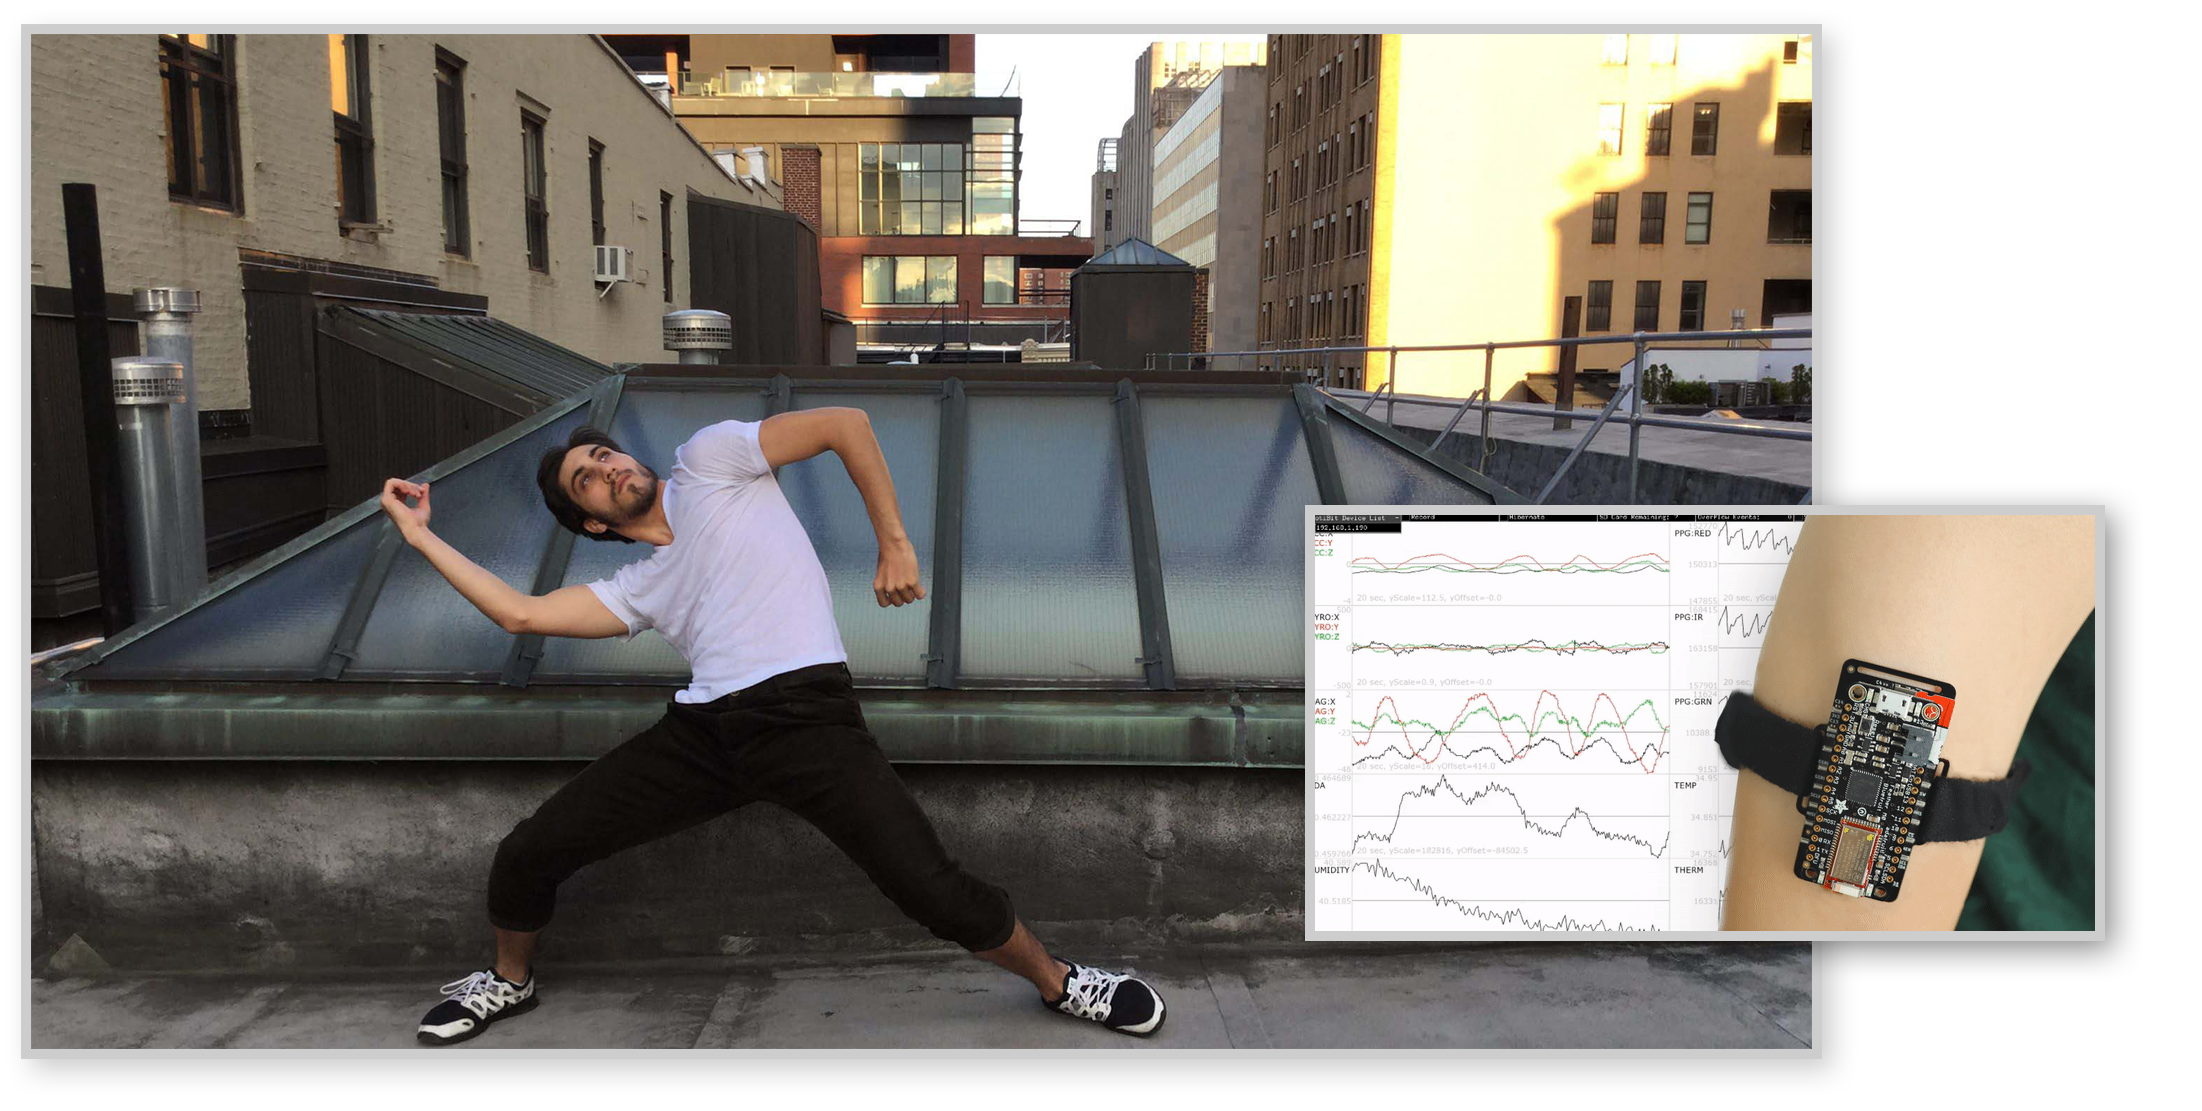 Hussein Smko dancing on a rooftop, and (inset) a picture of a person wearing a biometric device